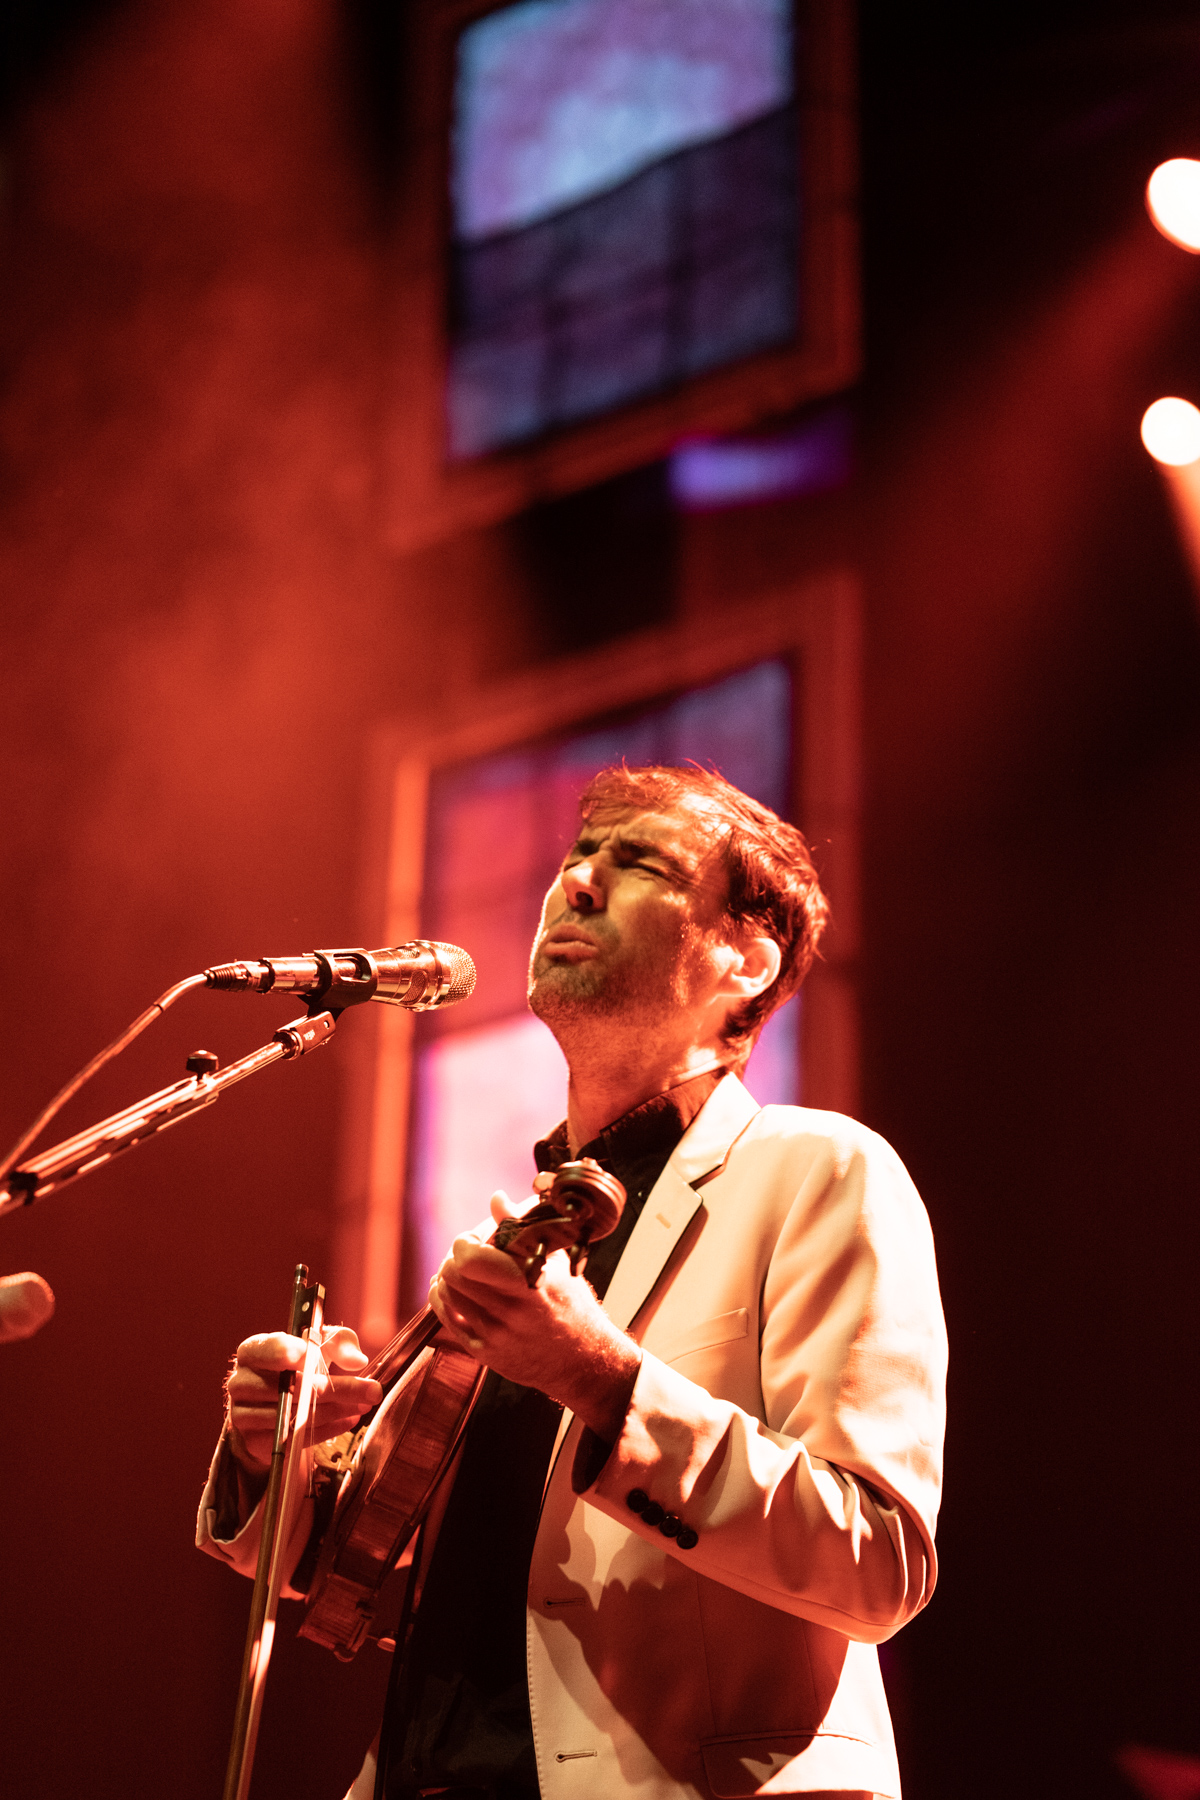 Andrew Bird at the Palace Theater